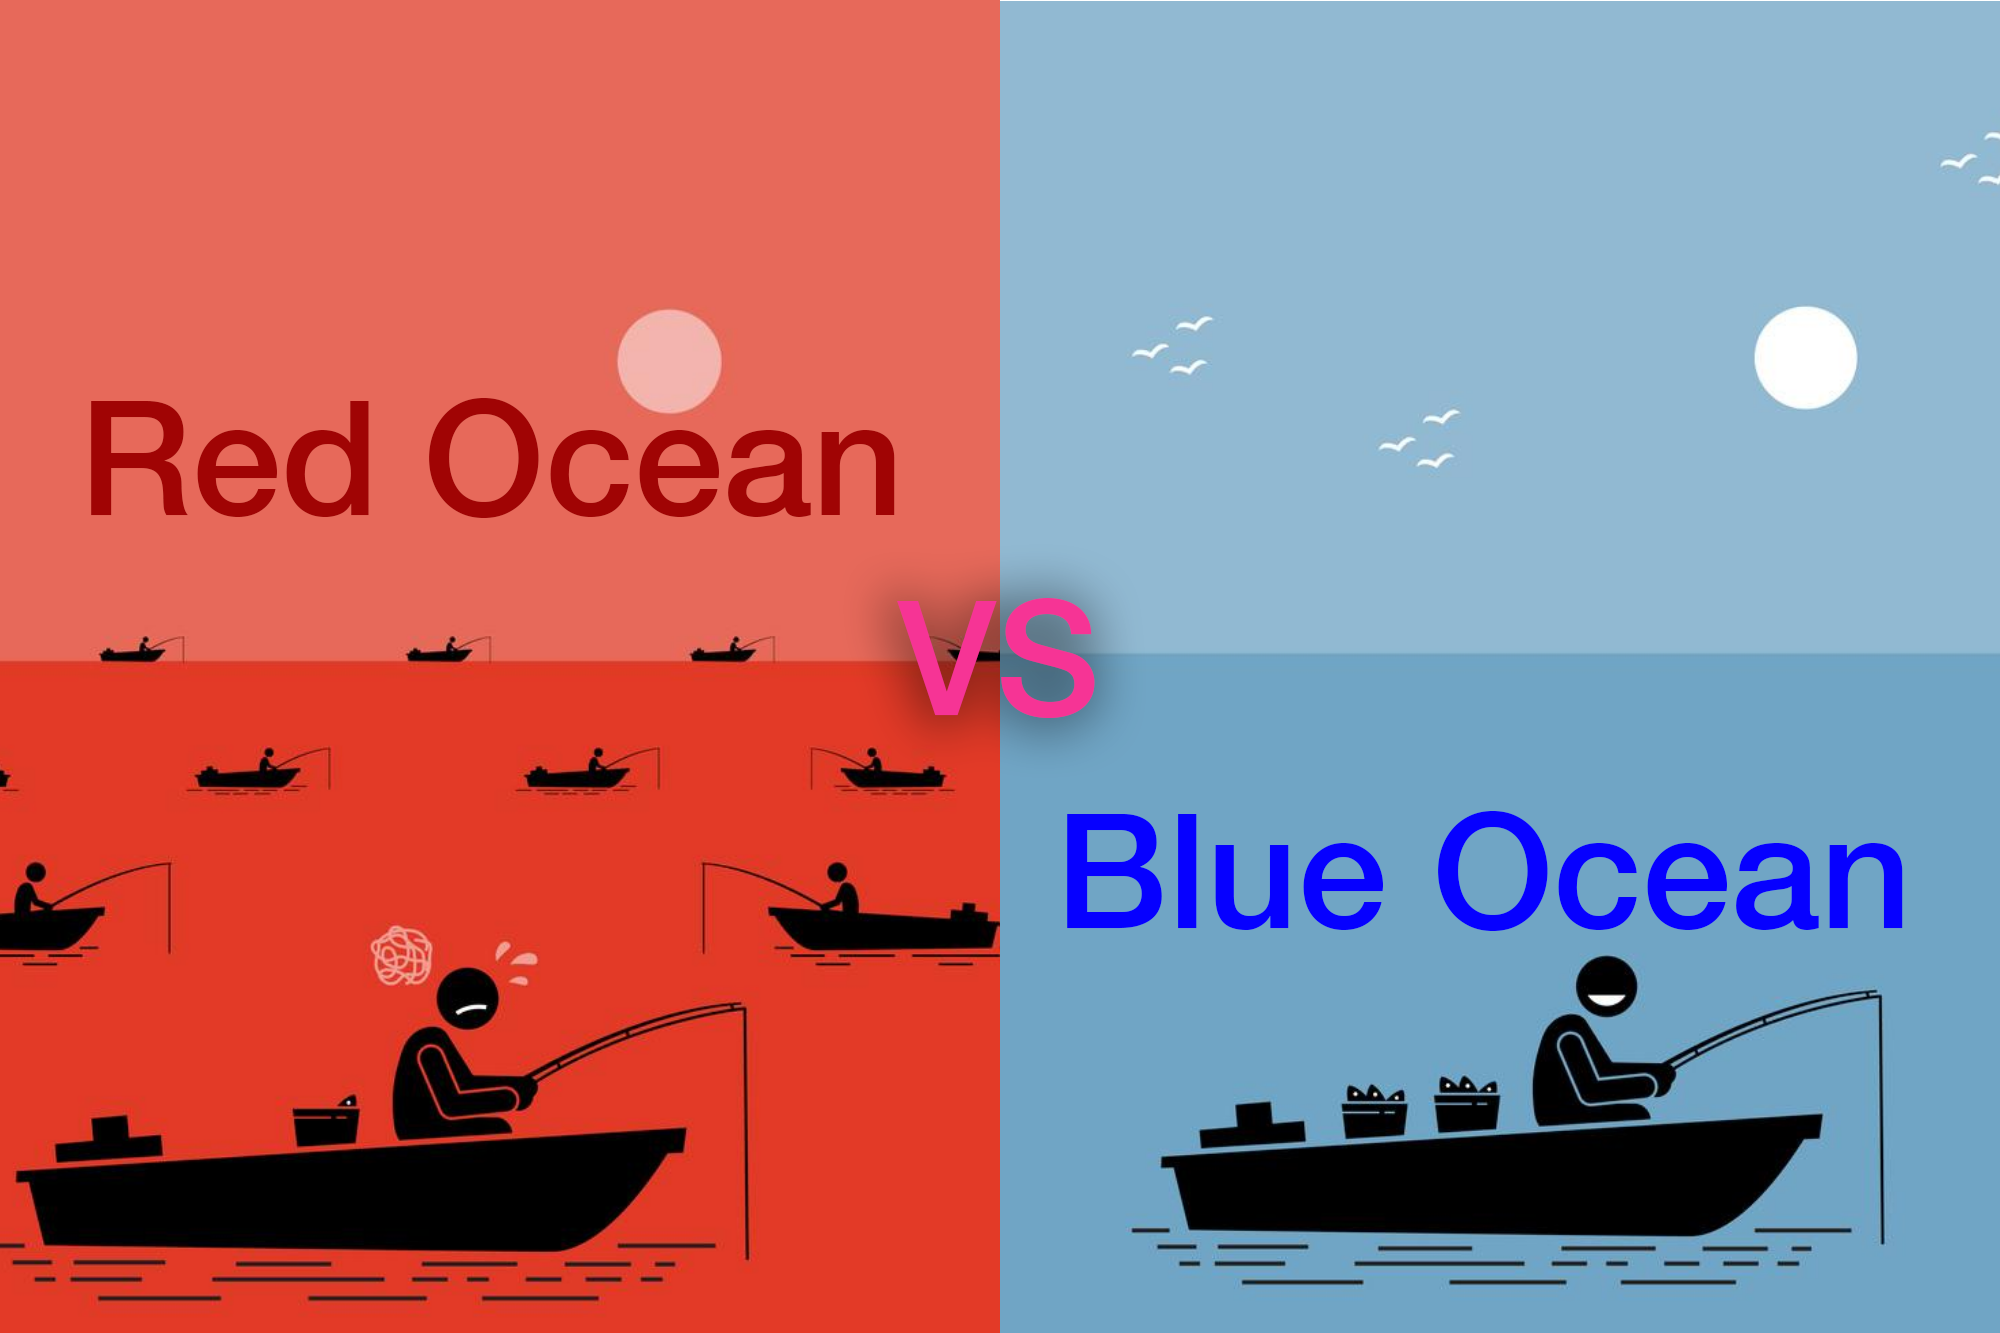 Are You Swimming in a Red or Blue Ocean?